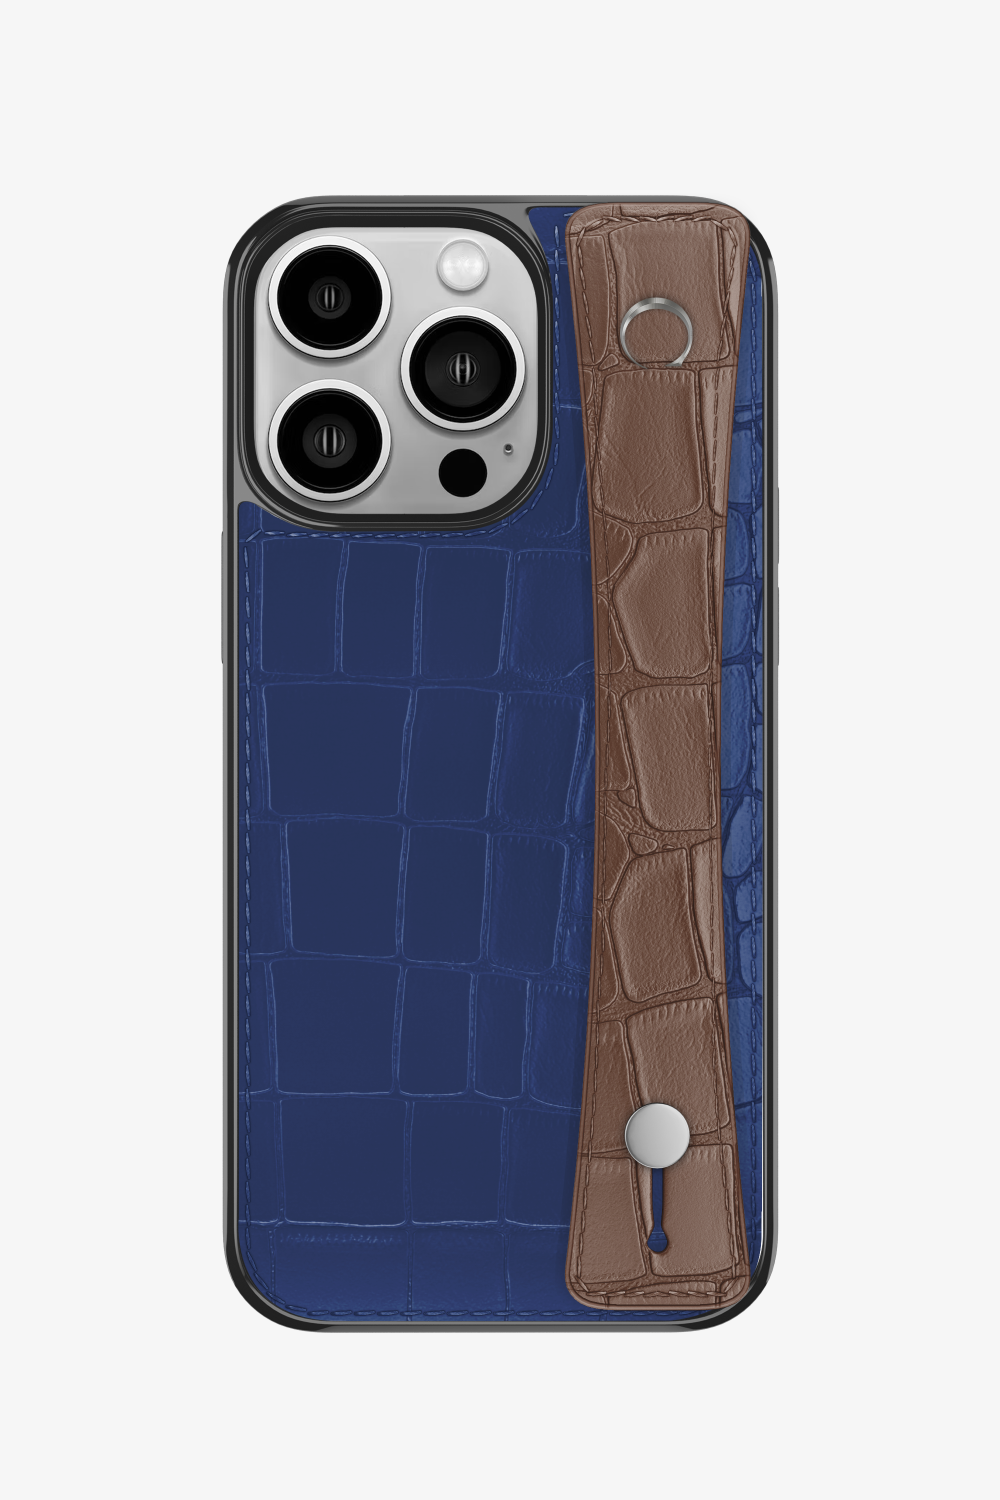 Alligator Sports Strap Case for iPhone 14 Pro - Navy Blue / Cocoa - zollofrance